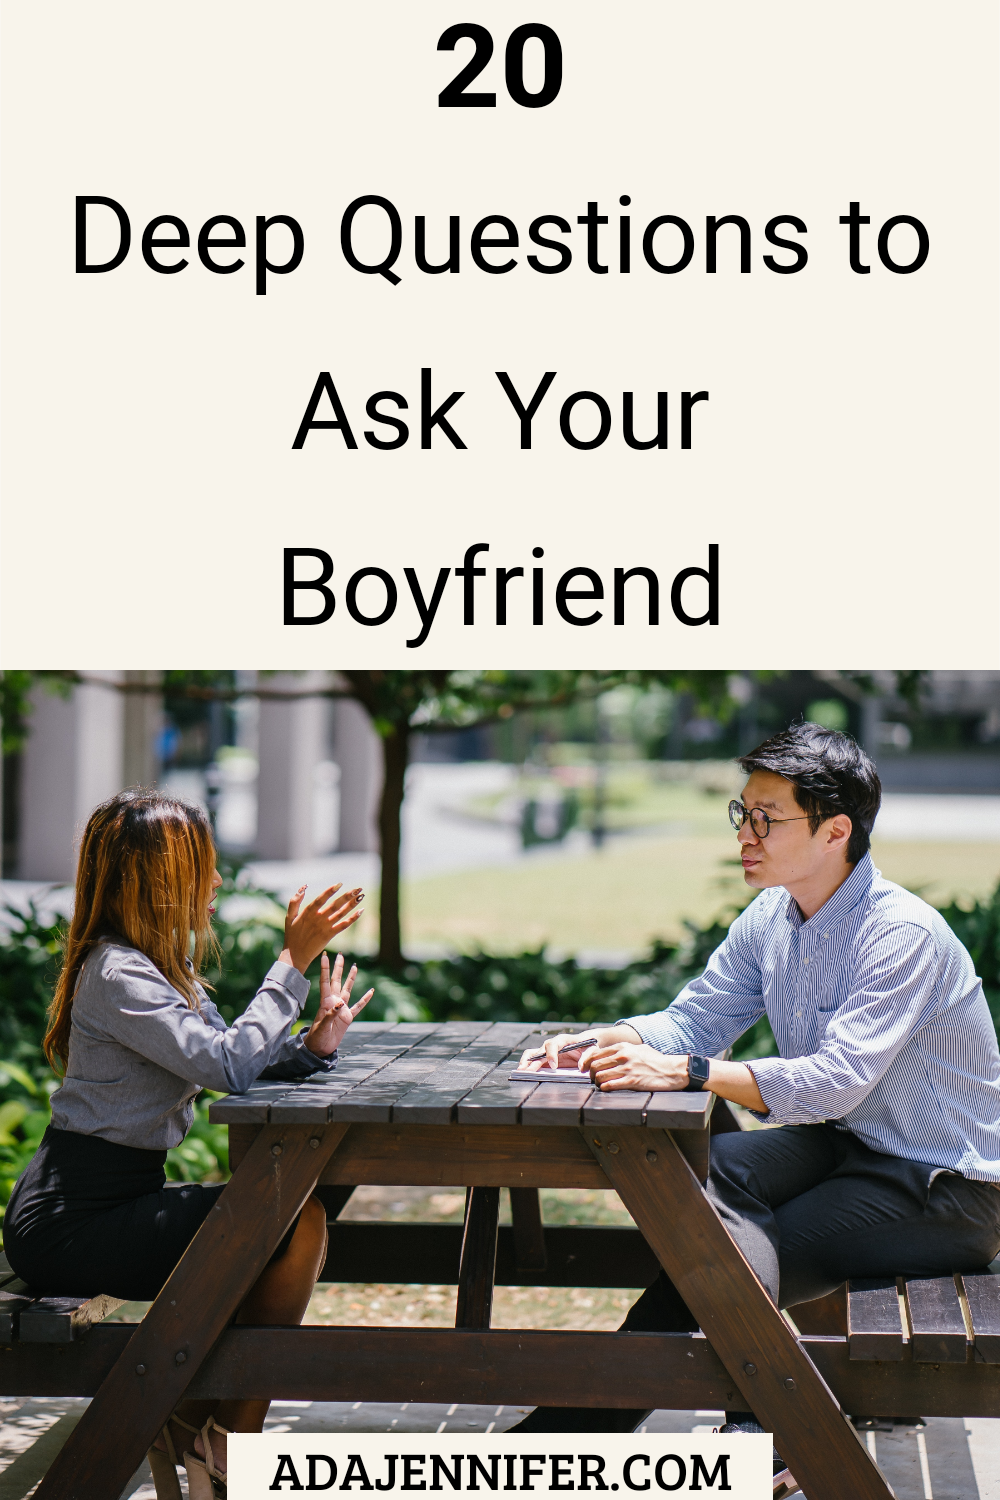 Deep questions to ask your boyfriend